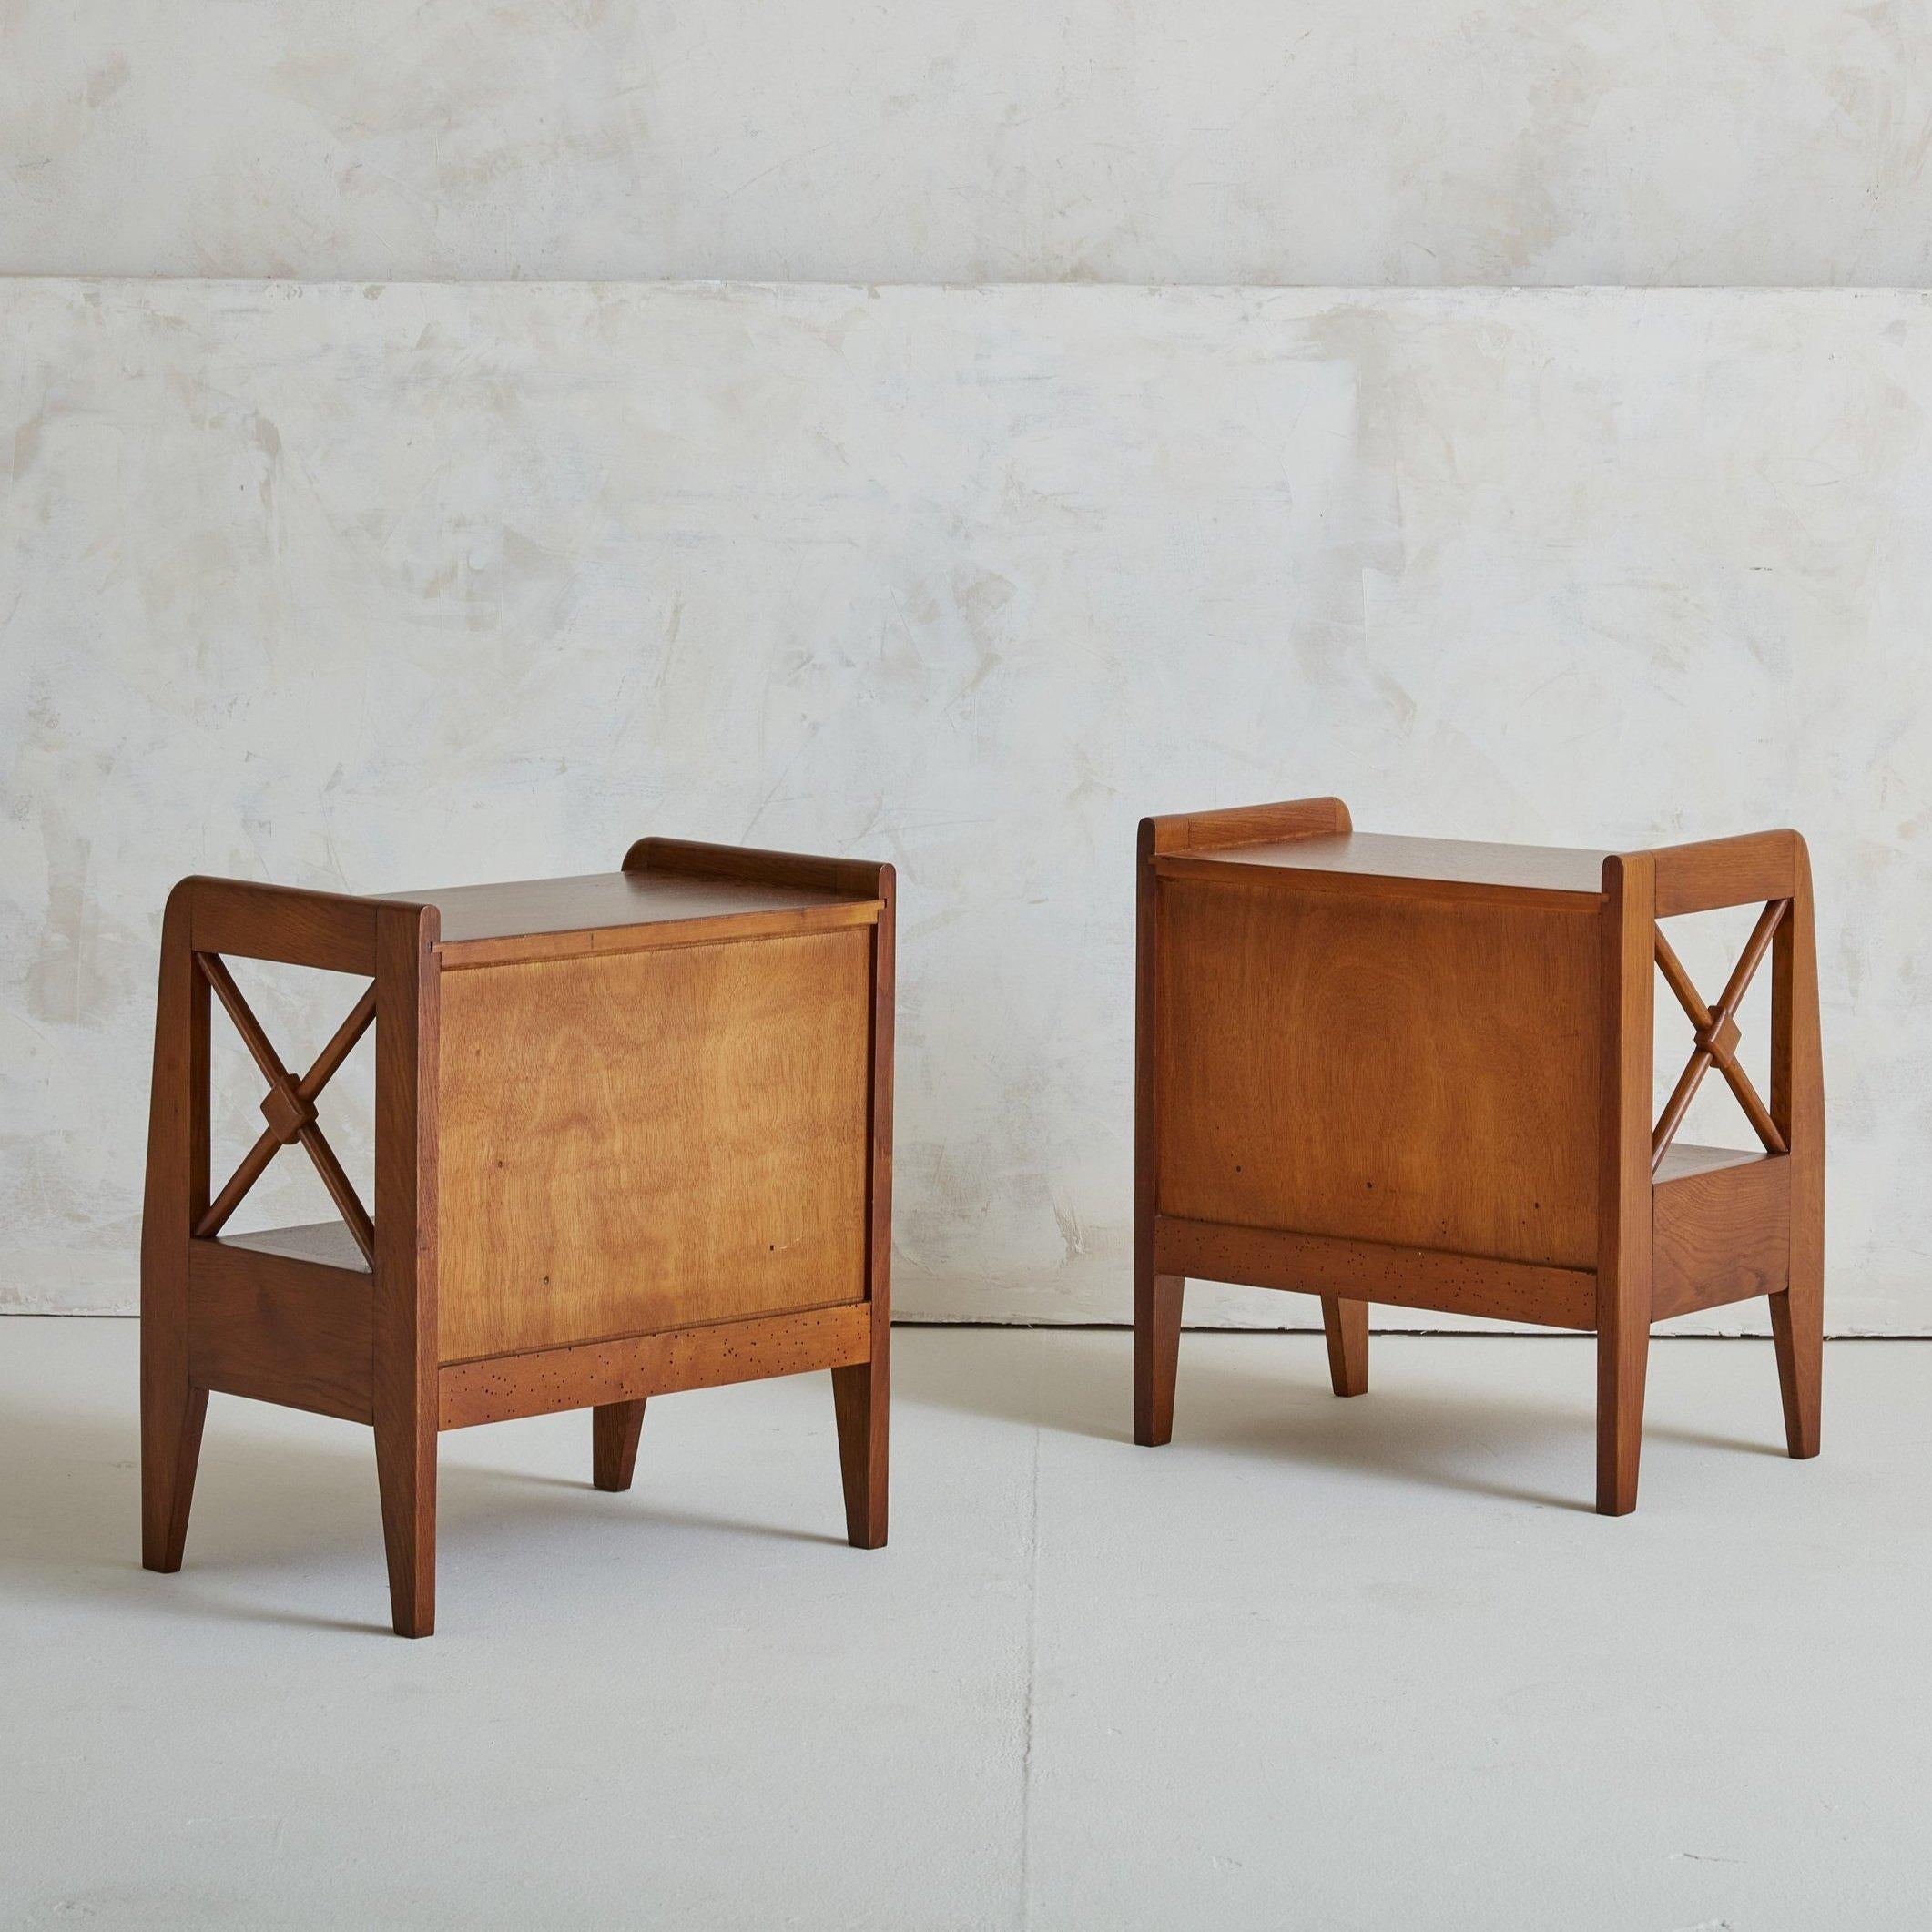 A pair of 1950s nightstands sourced in France. Crafted of oak wood, these feature decorative side stretchers and a single drawer for storage. These are inspired by forms of Jacques Adnet. These have been fully refinished and restored by our team of